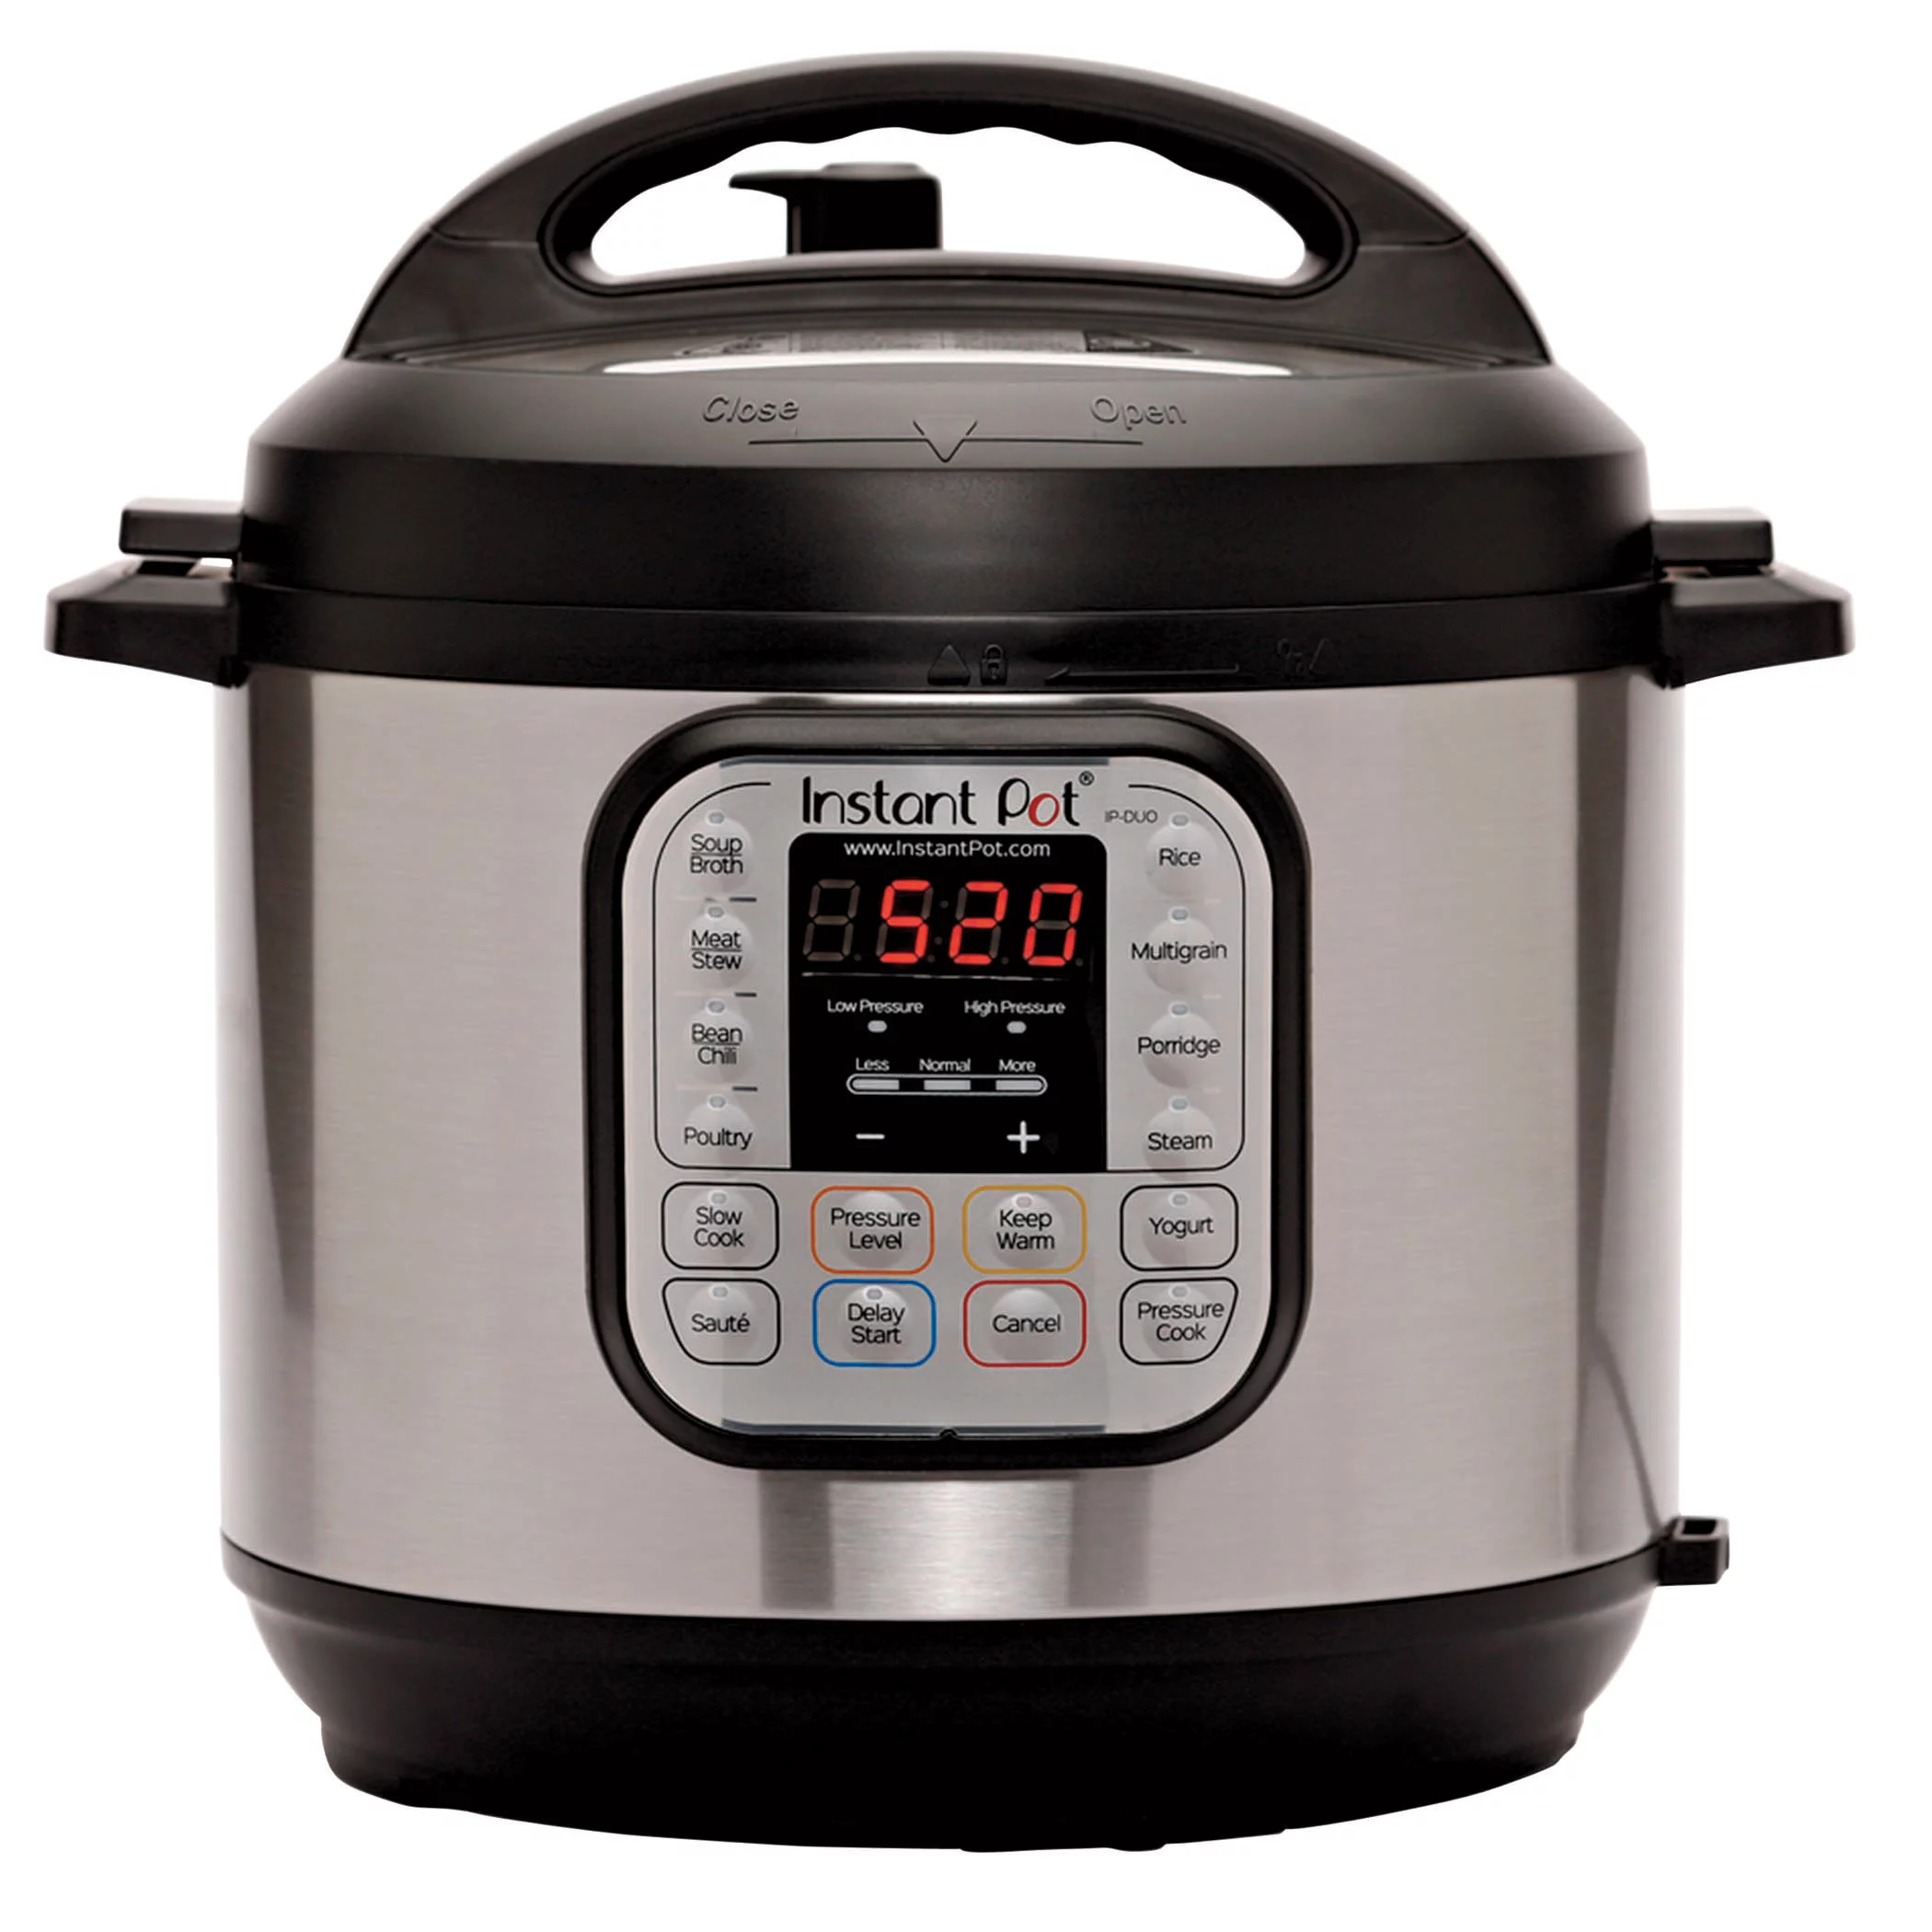 Instant Pot: You can pressure cook anything in this.